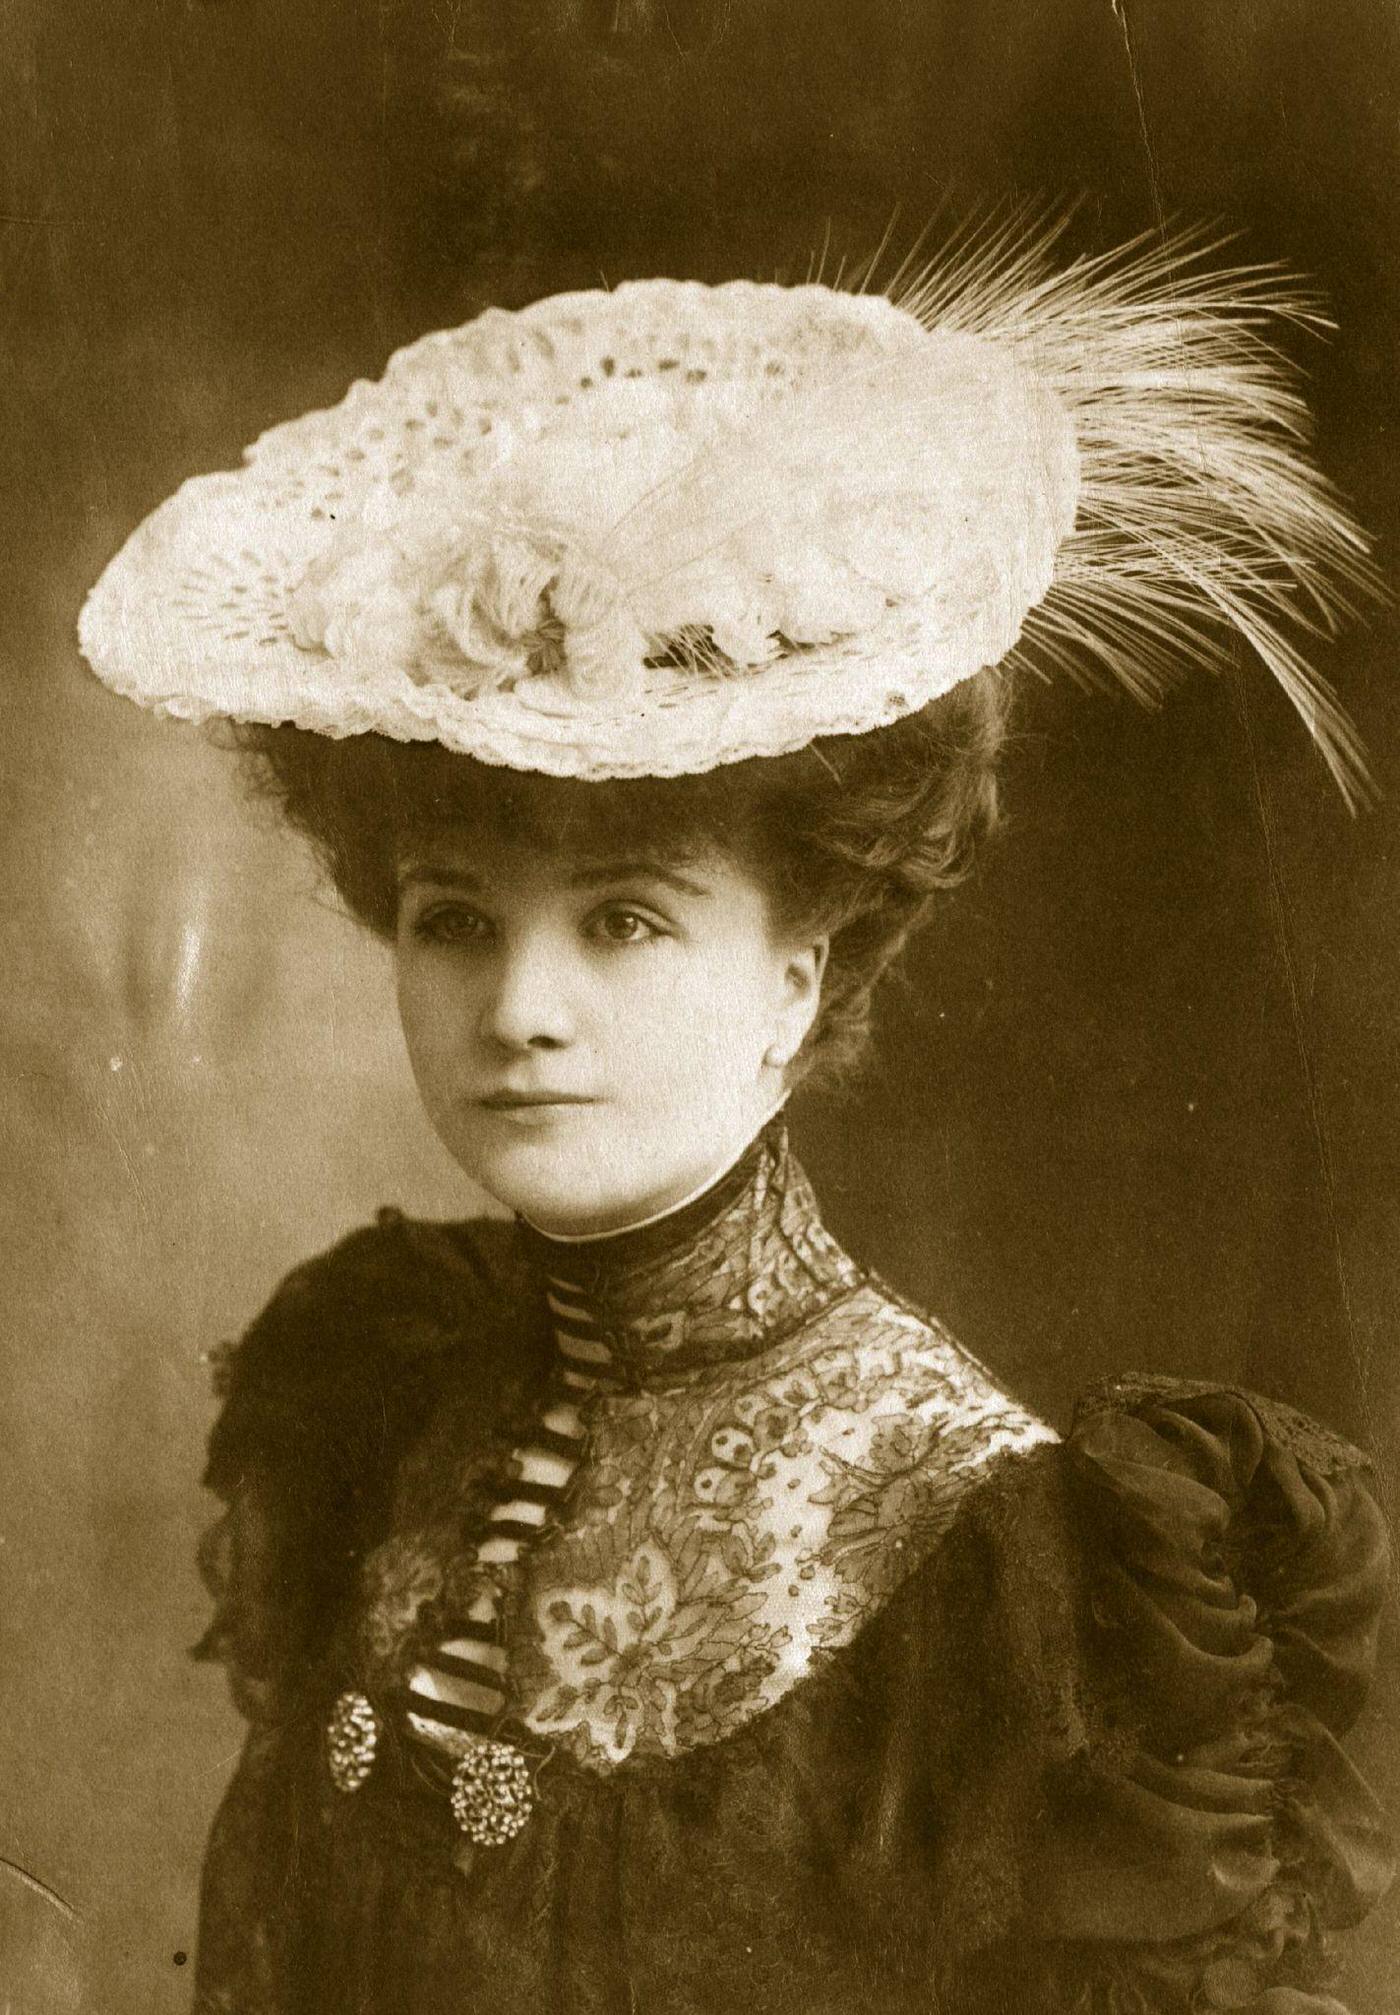 Miss Lewis wears a dark period dress with alluring lace detail at the throat, set off beautifully by a feather-trimmed hat